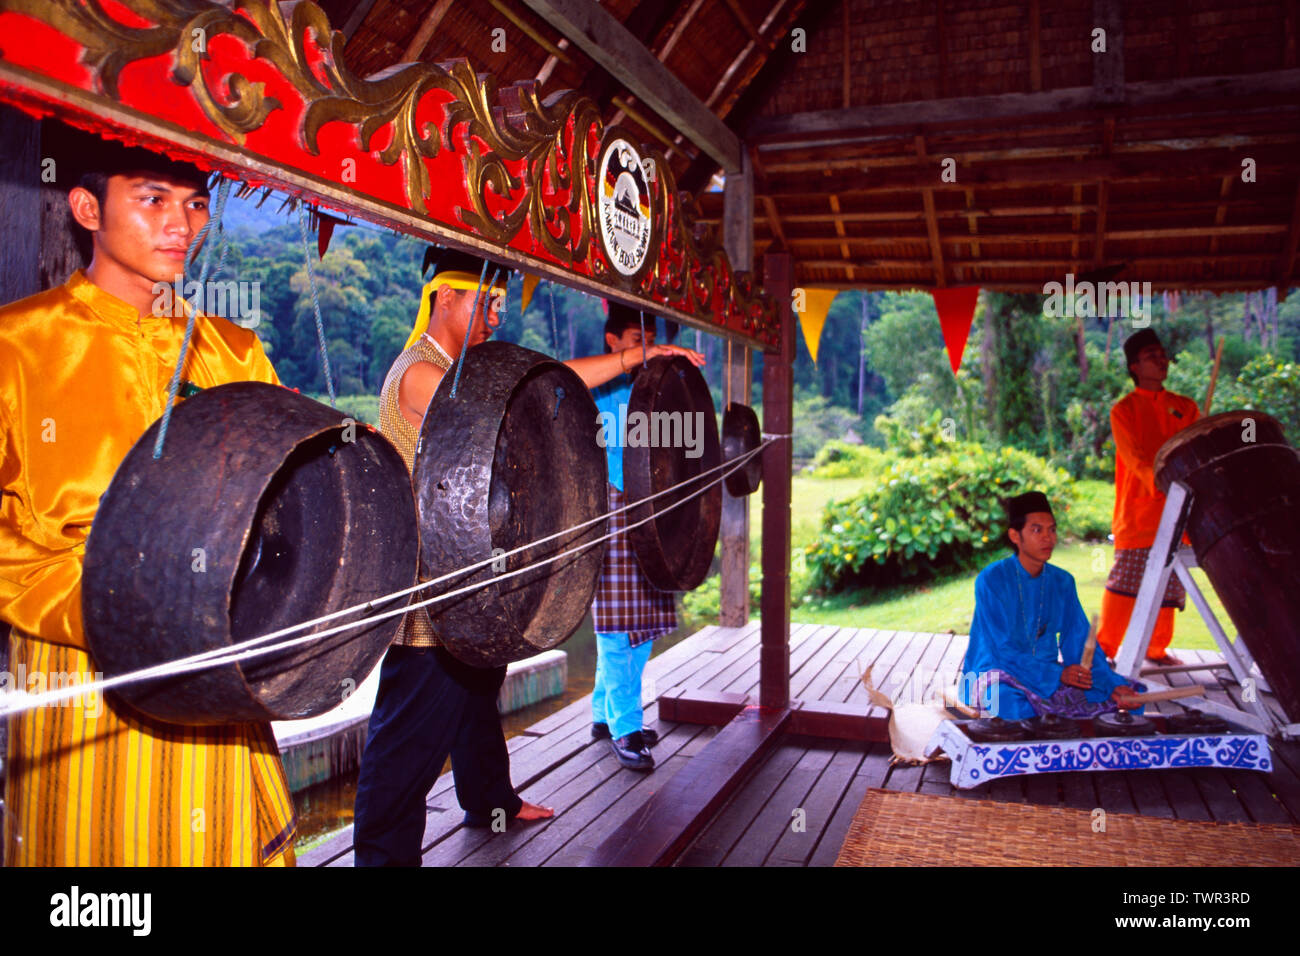 Malaysia/Borneo: Iban Headhunter musicians playing in the rain forest of Sarawak Stock Photo